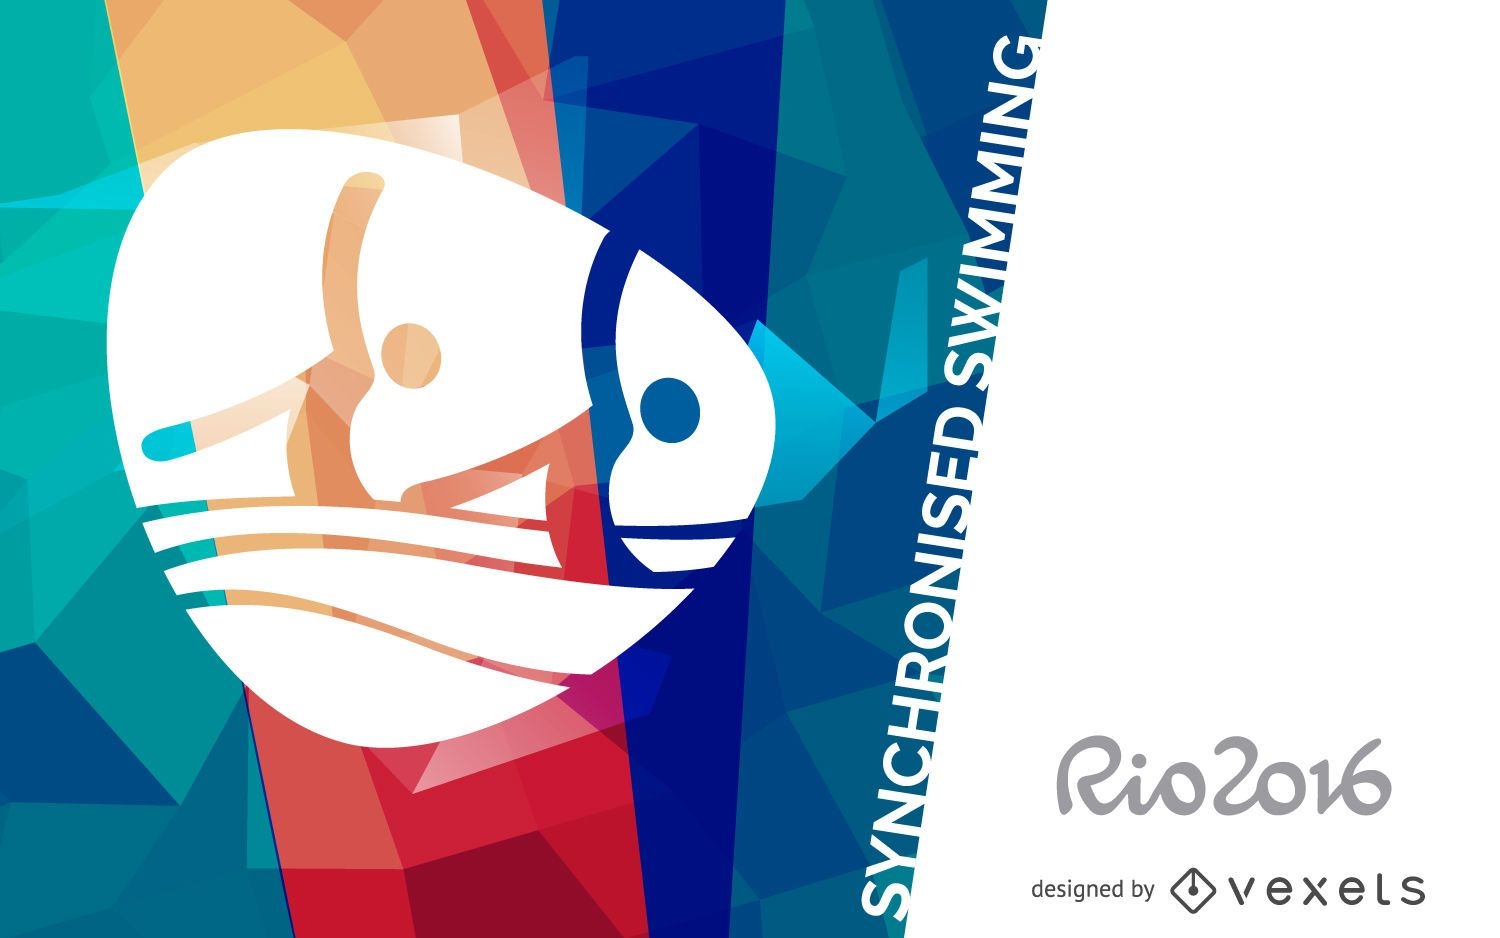 Rio 2016 synchronised swimming banner